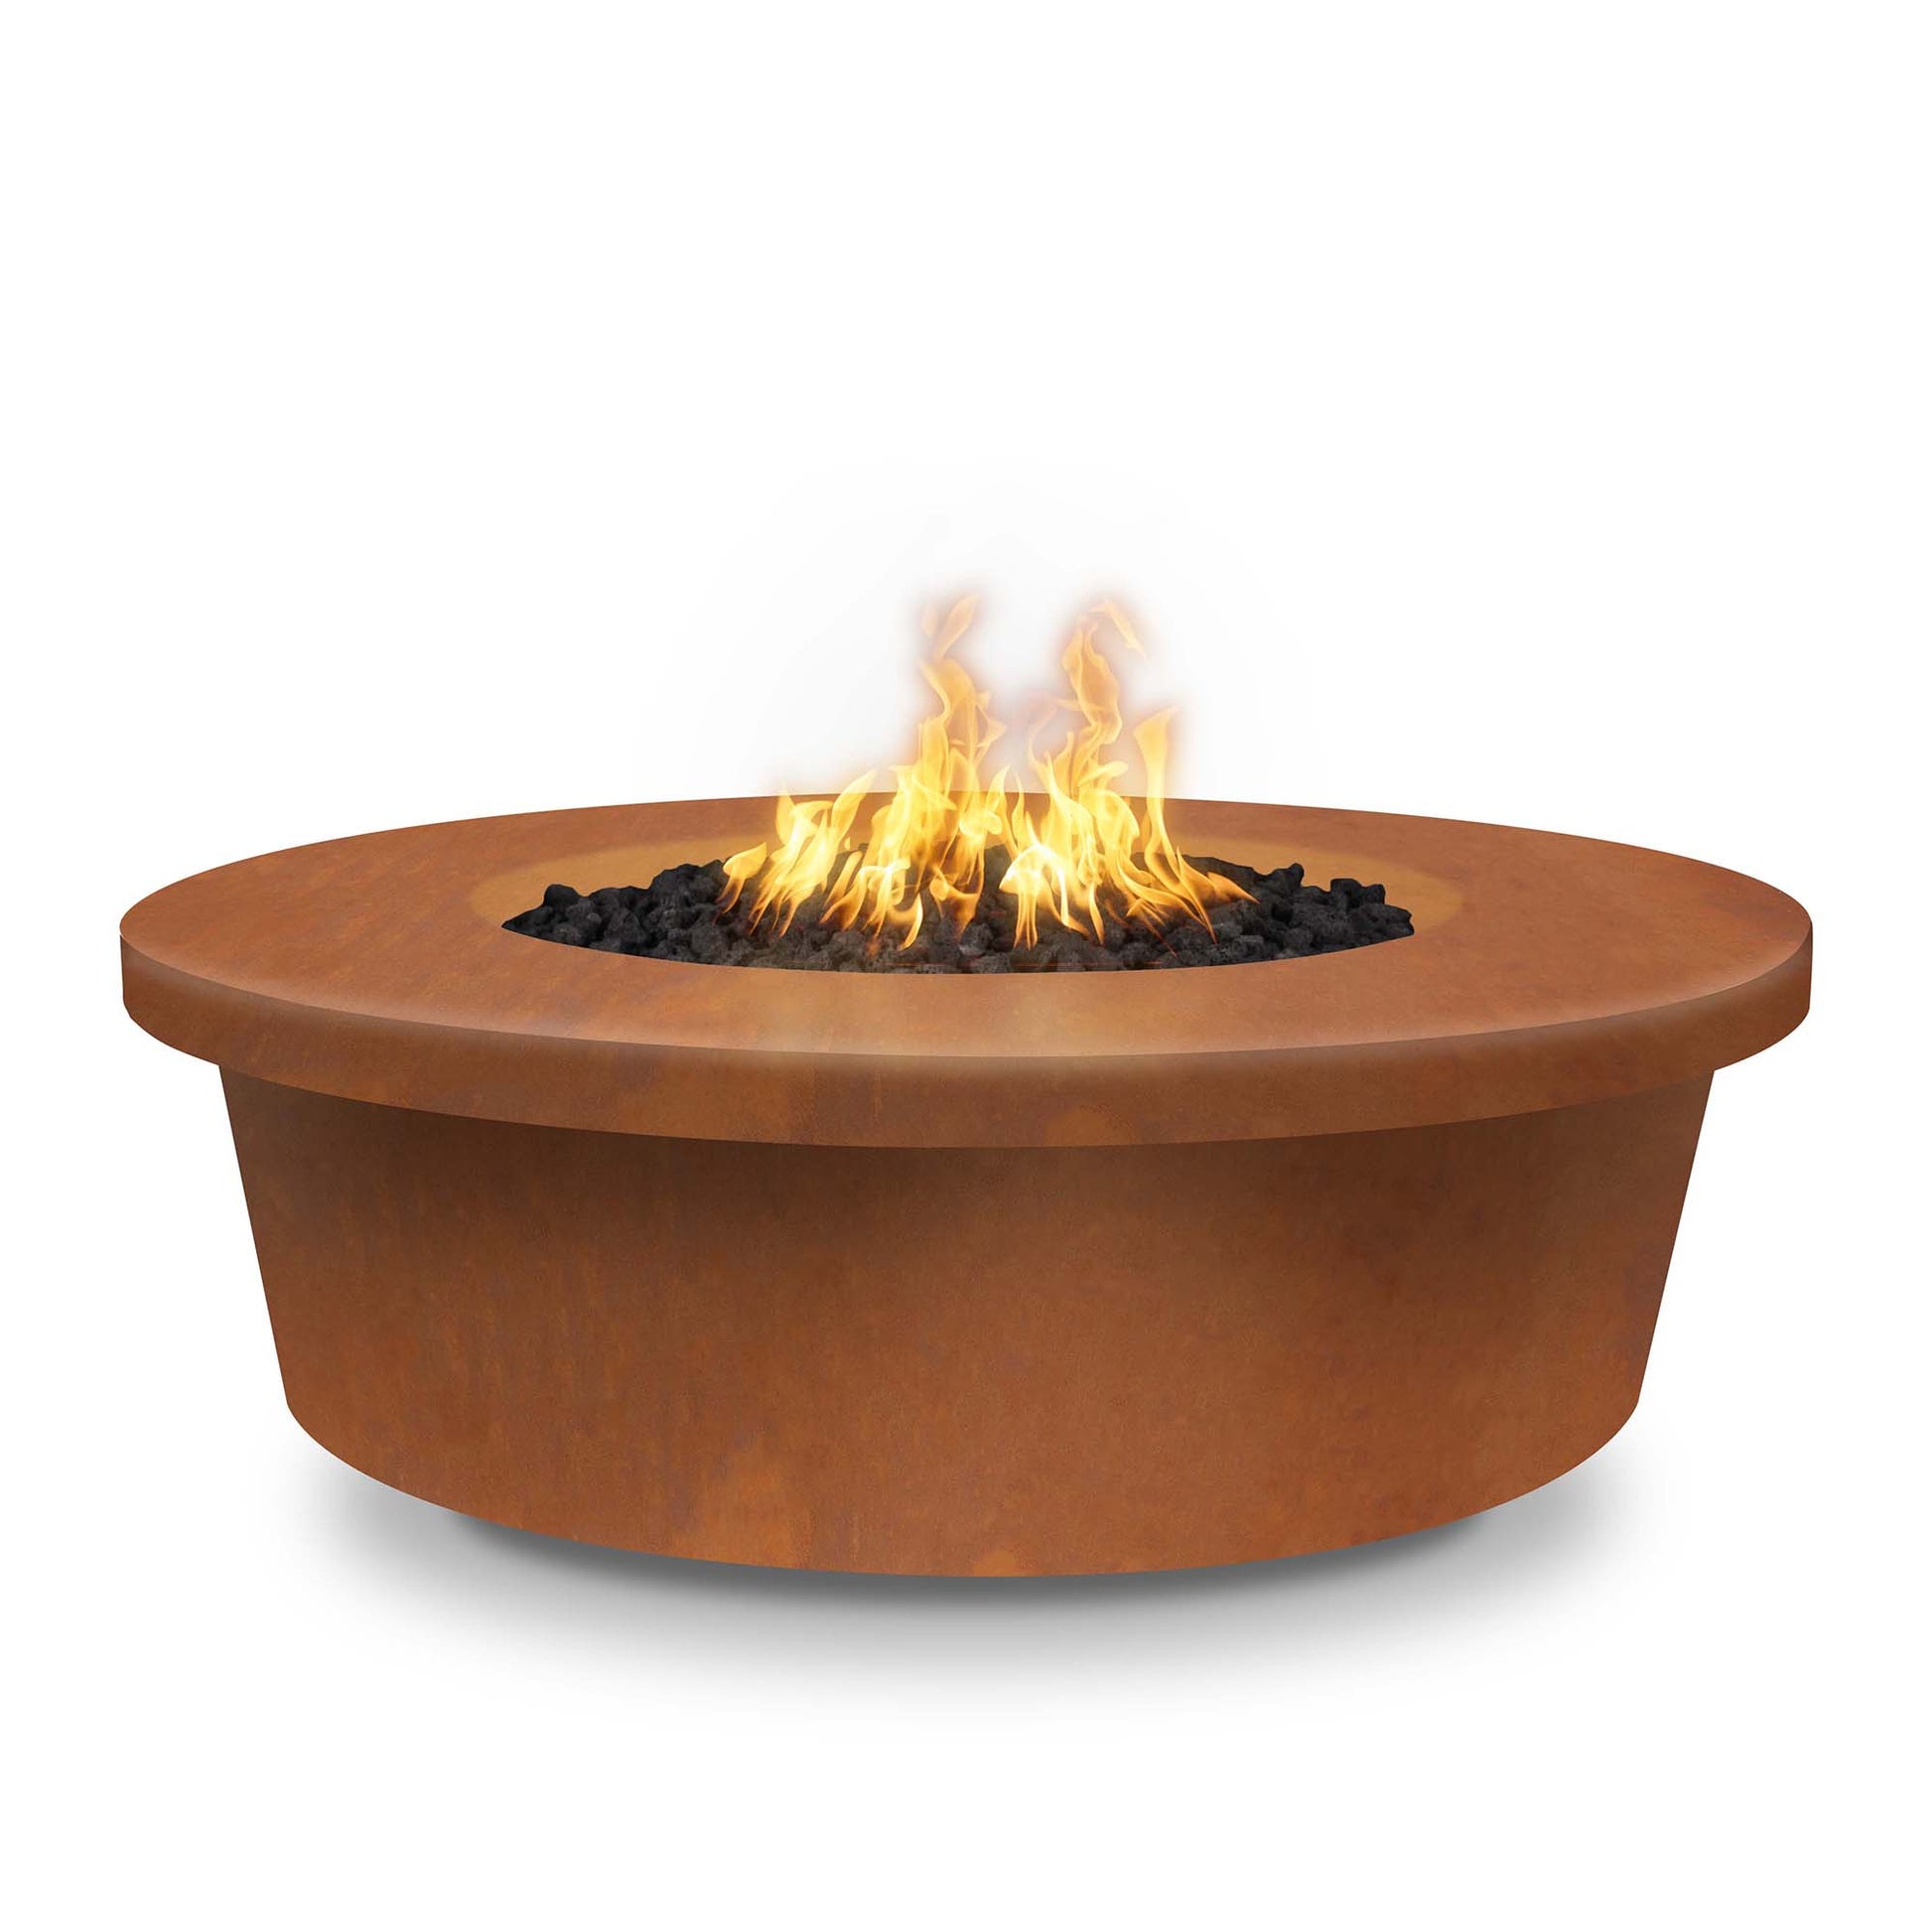 The Outdoor Plus Round Tempe 48" Corten Steel Liquid Propane Fire Pit with 110V Electronic Ignition